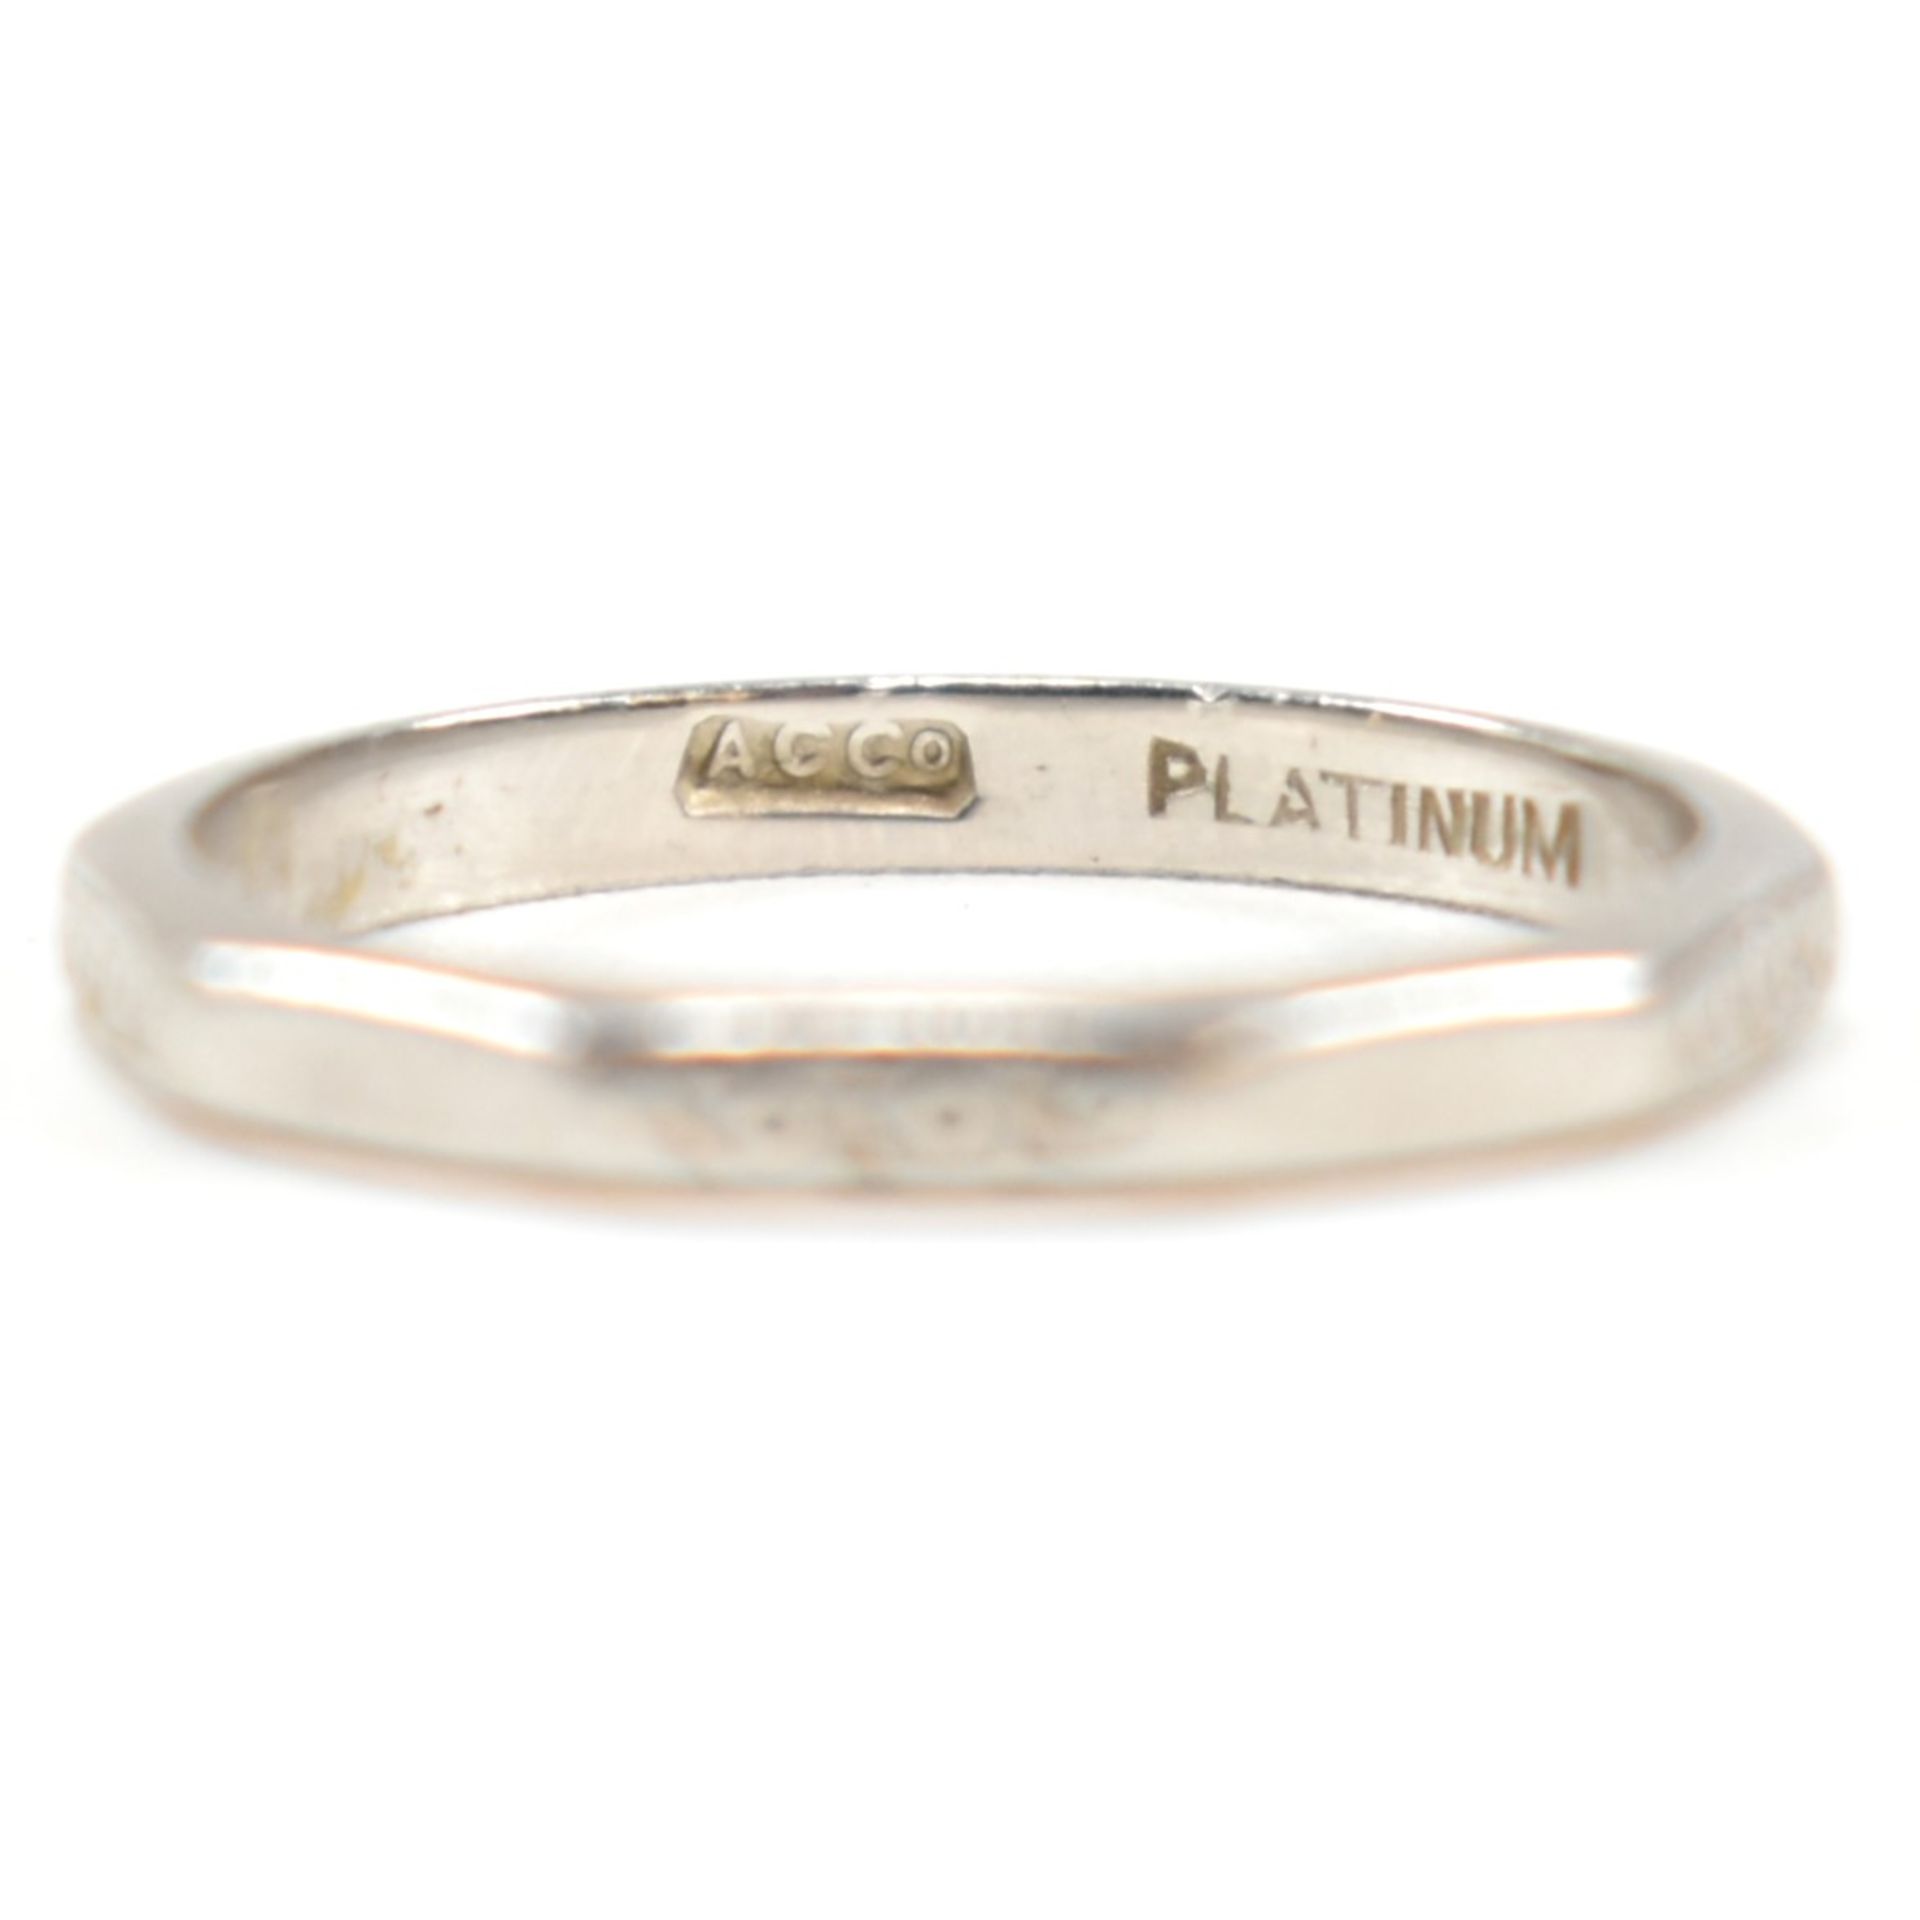 PLATINUM FACETED BAND RING - Image 2 of 5